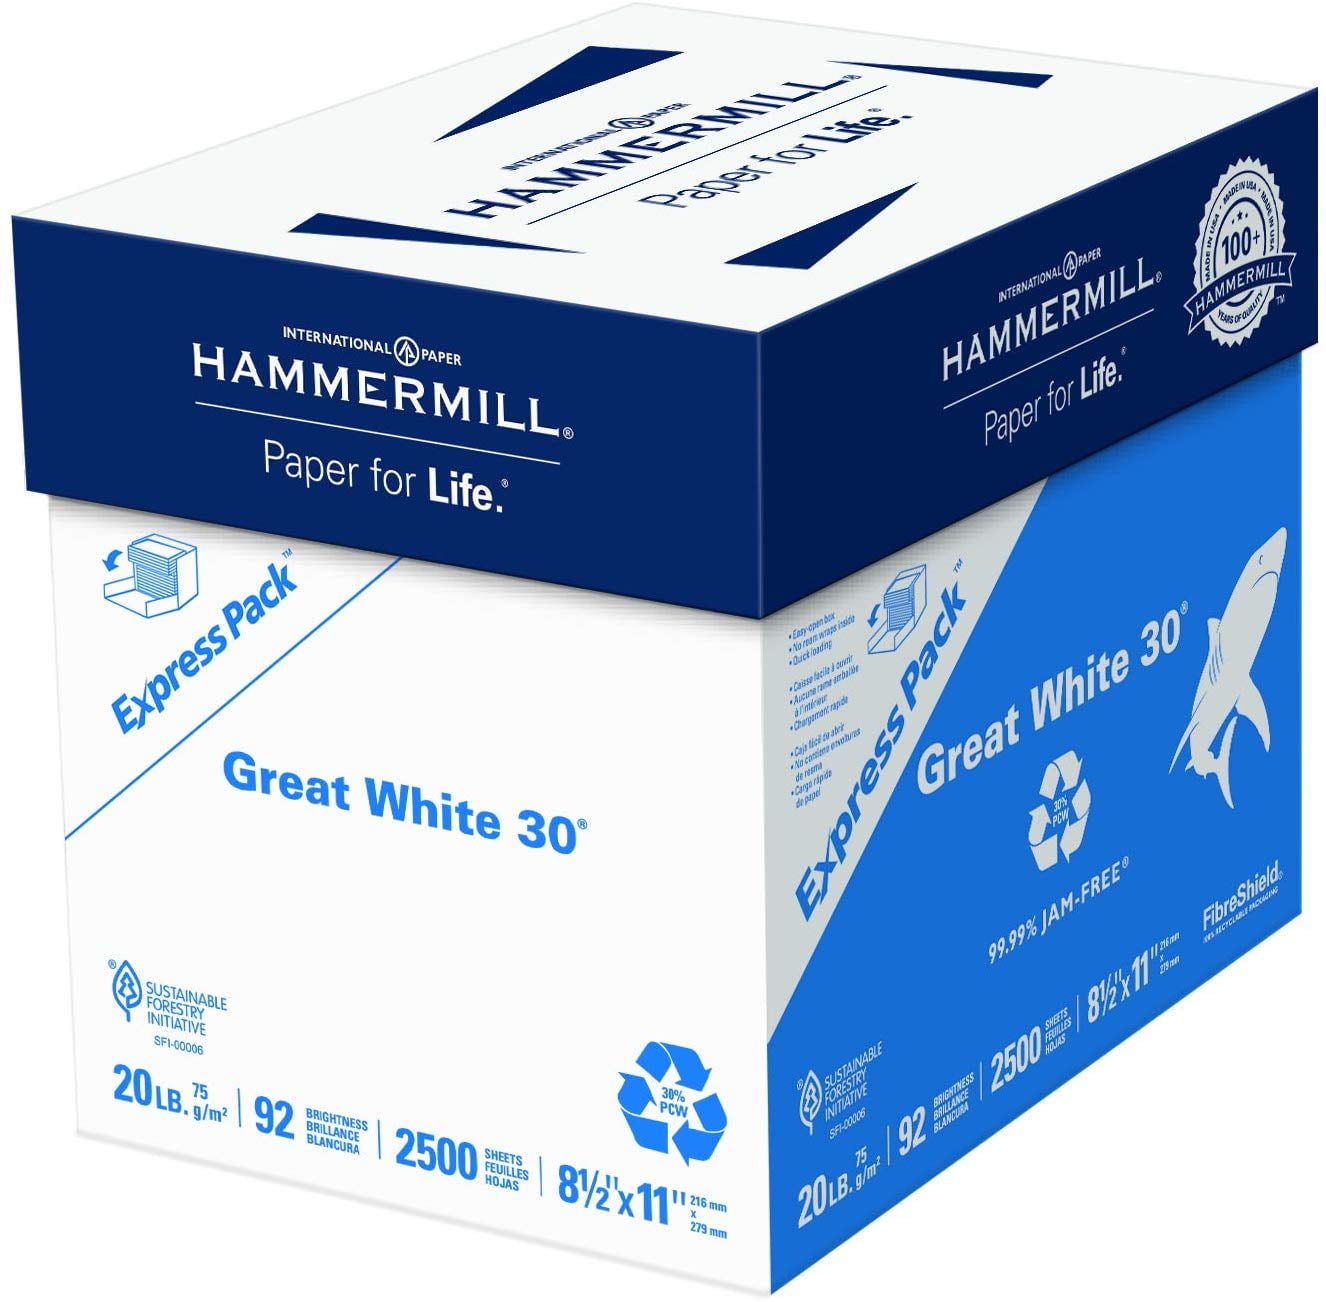 hammermill-paper-great-white-30-recycled-printer-paper-8-5-x-11